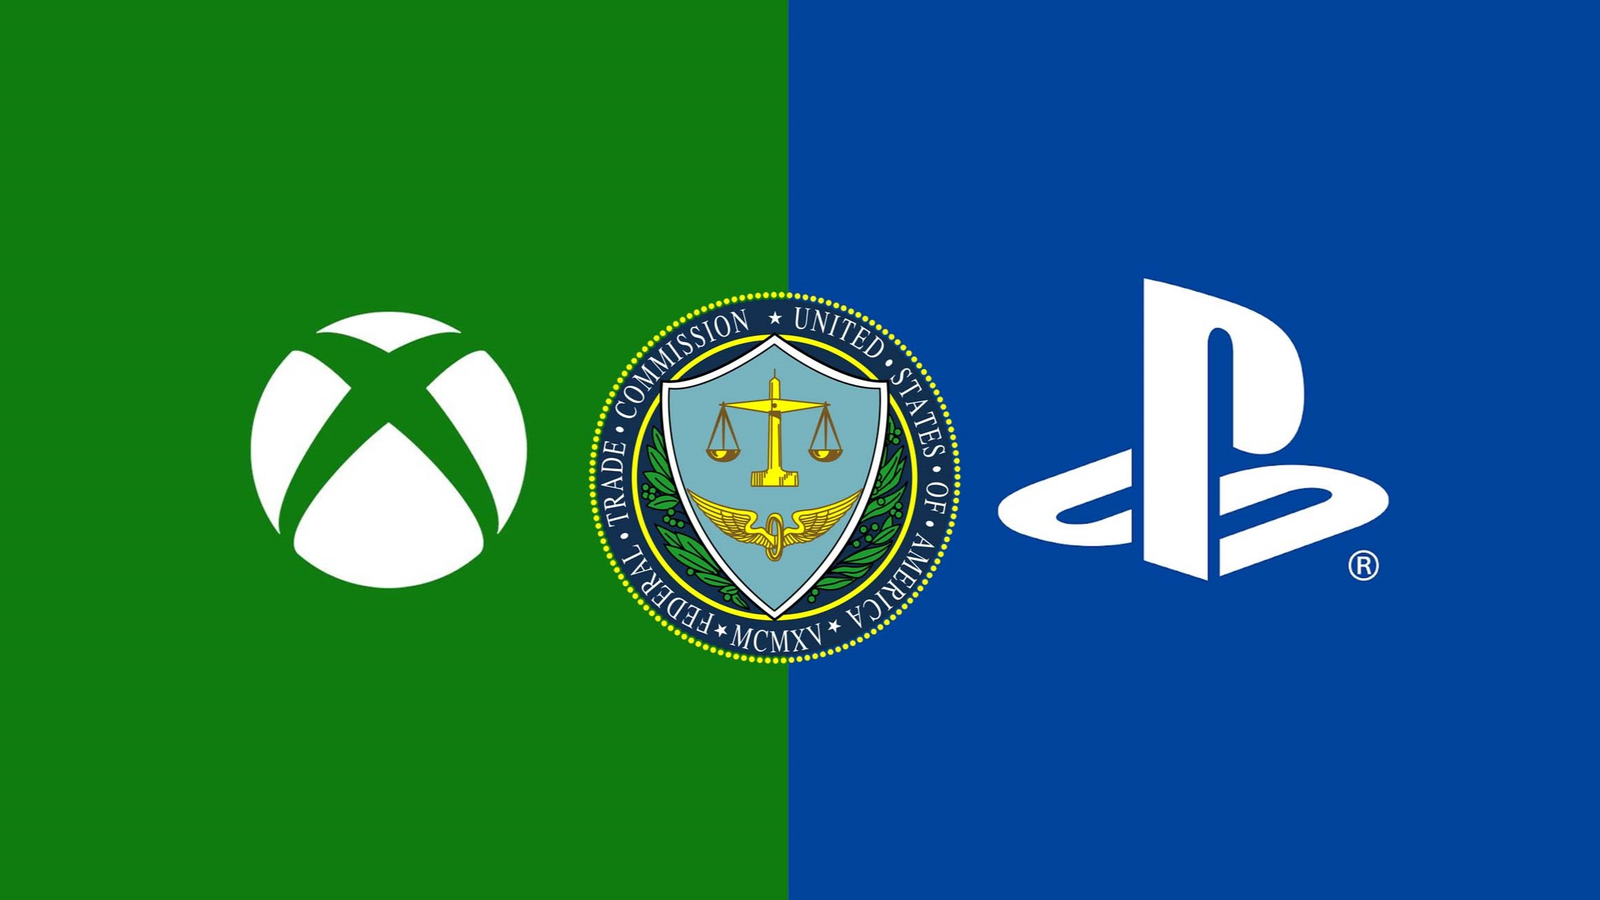 Xbox Game Studios + XGS Publishing + Bethesda Announced and